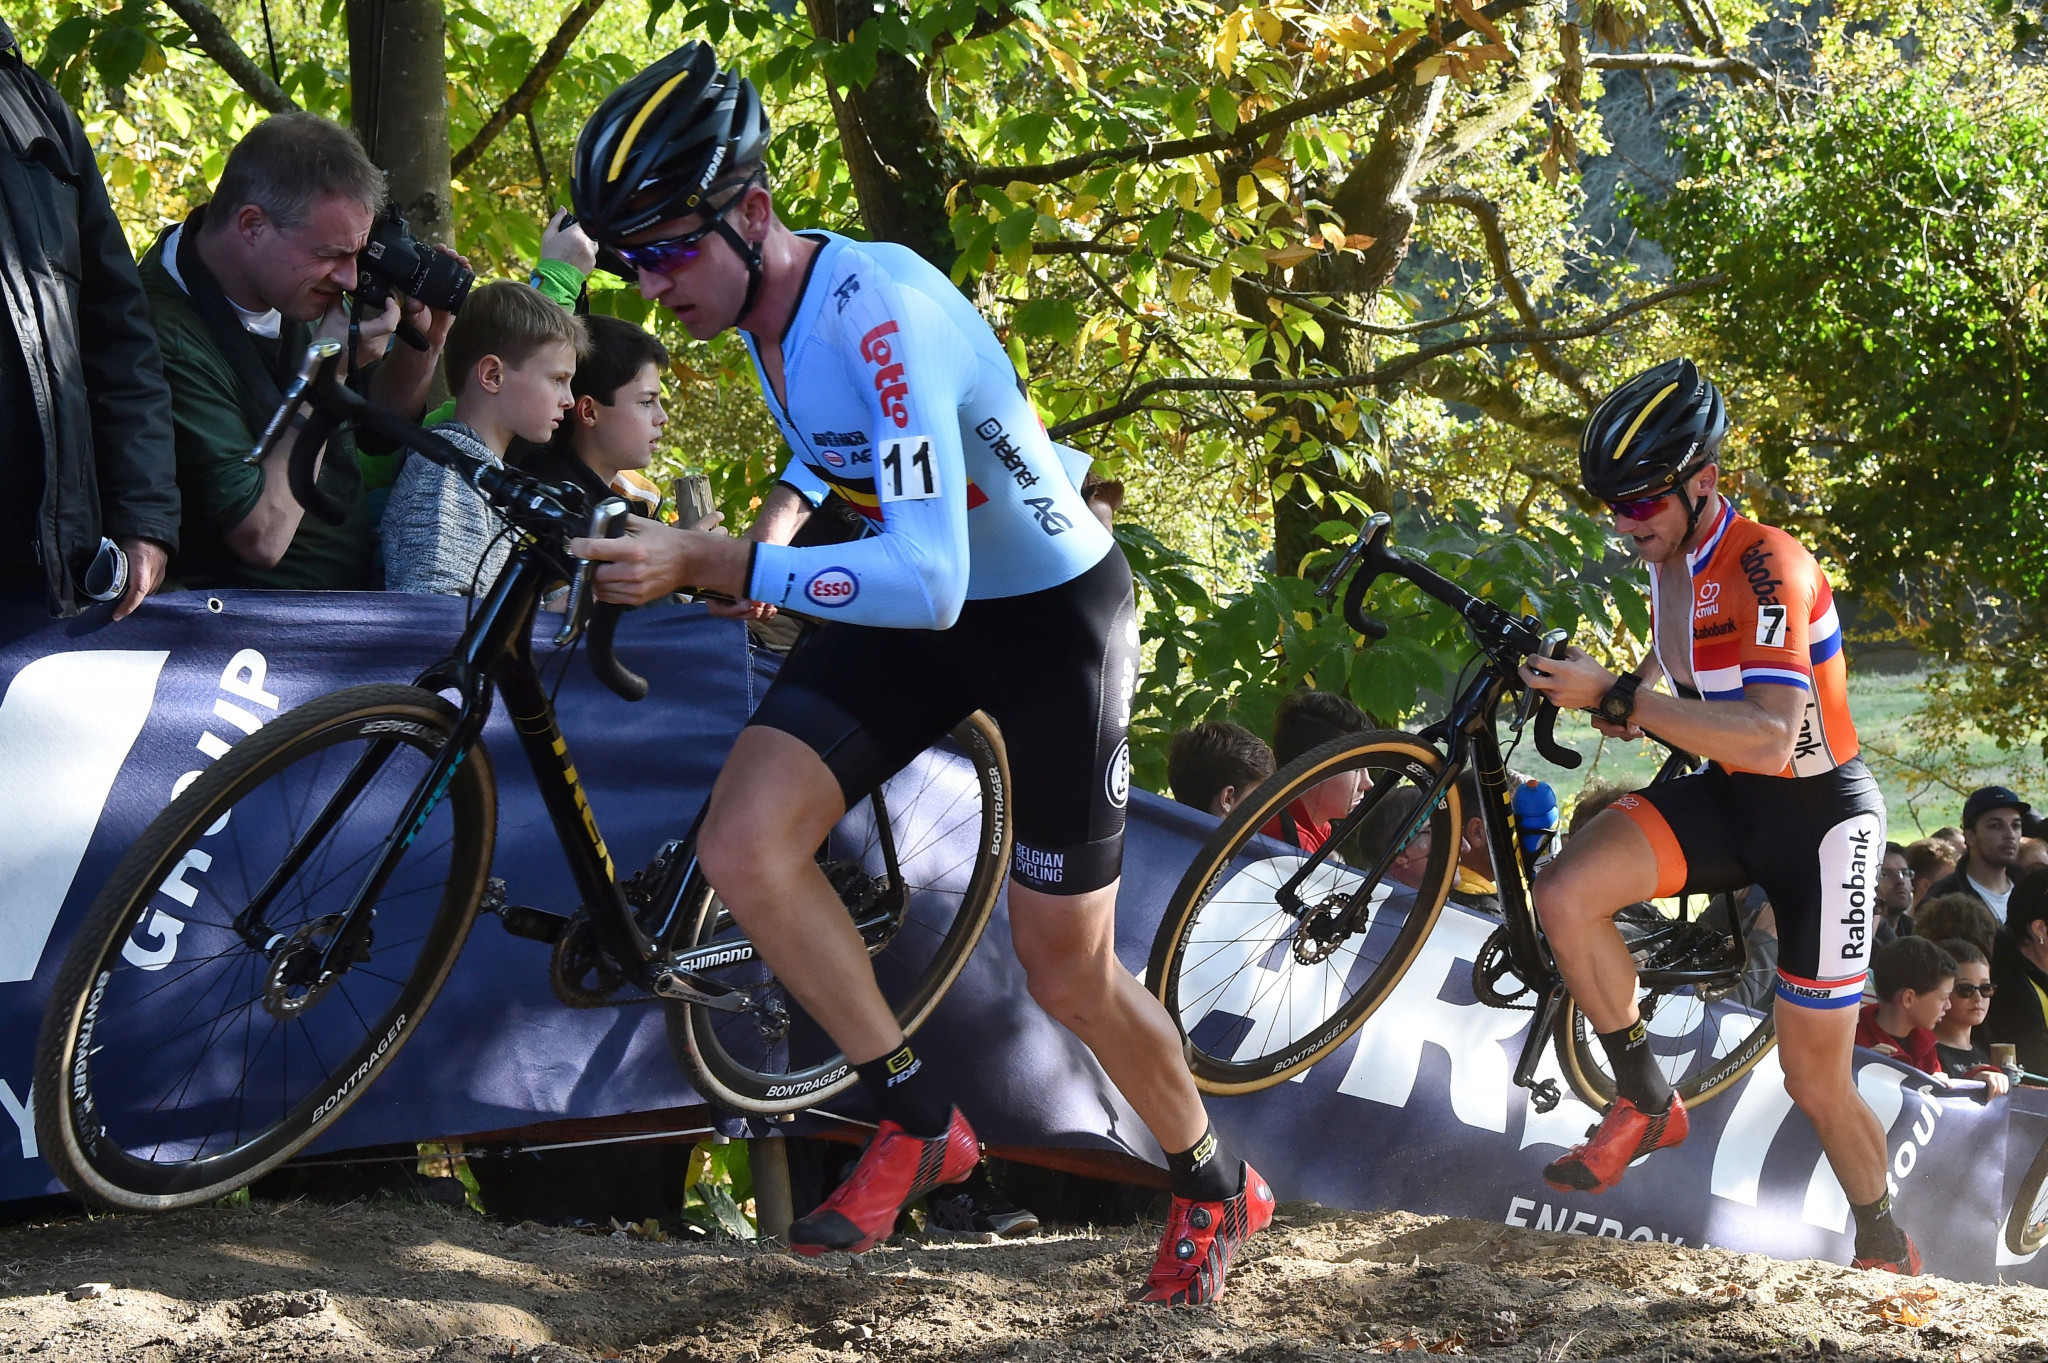 Aerts aims to defend title at Cyclo-Cross European Championships